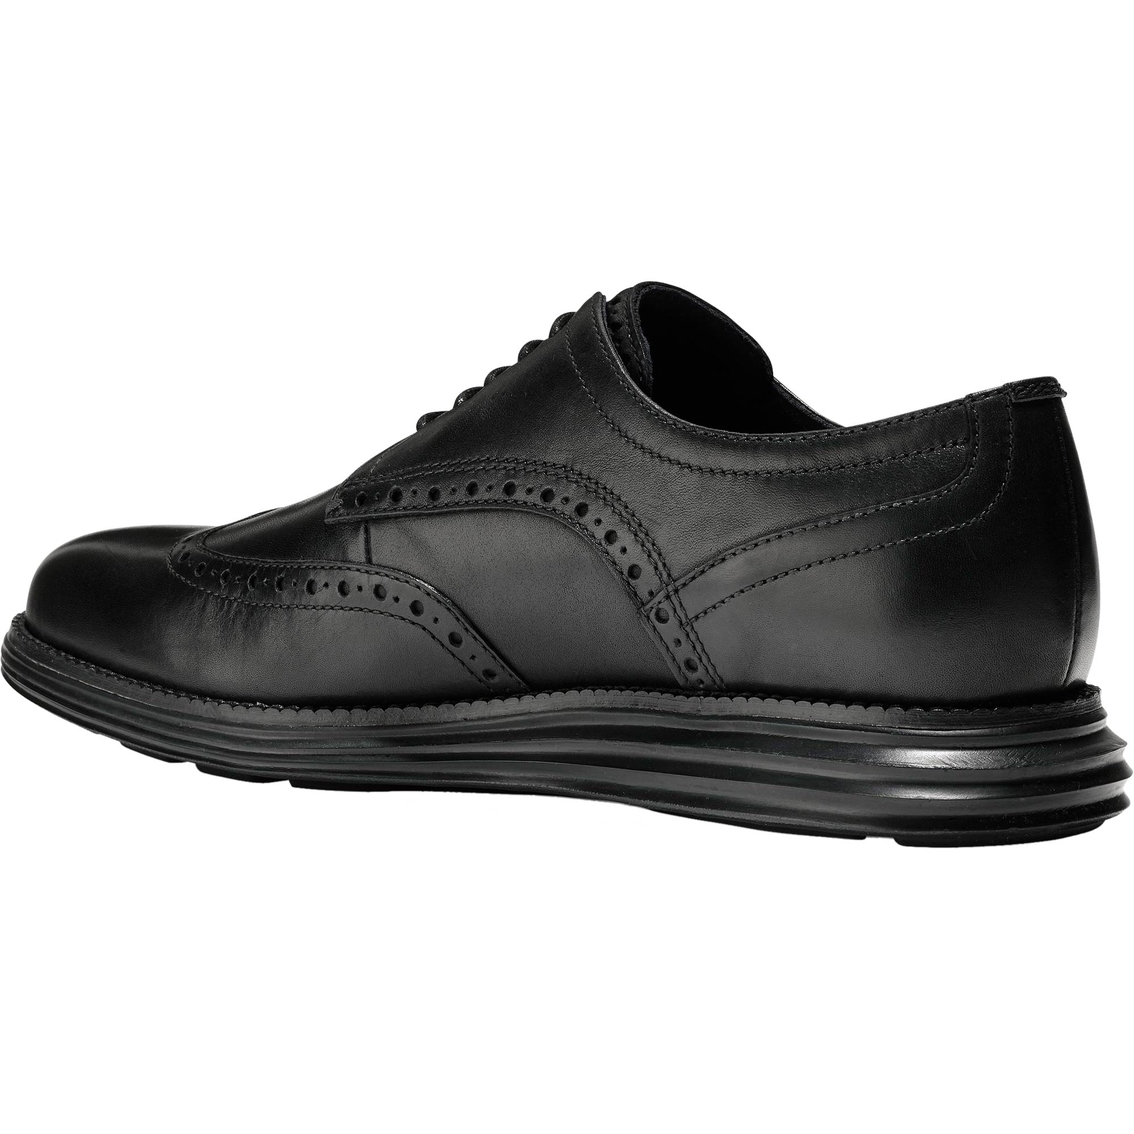 Cole Haan Original Grand Wingtip Oxford Shoes - Image 3 of 5